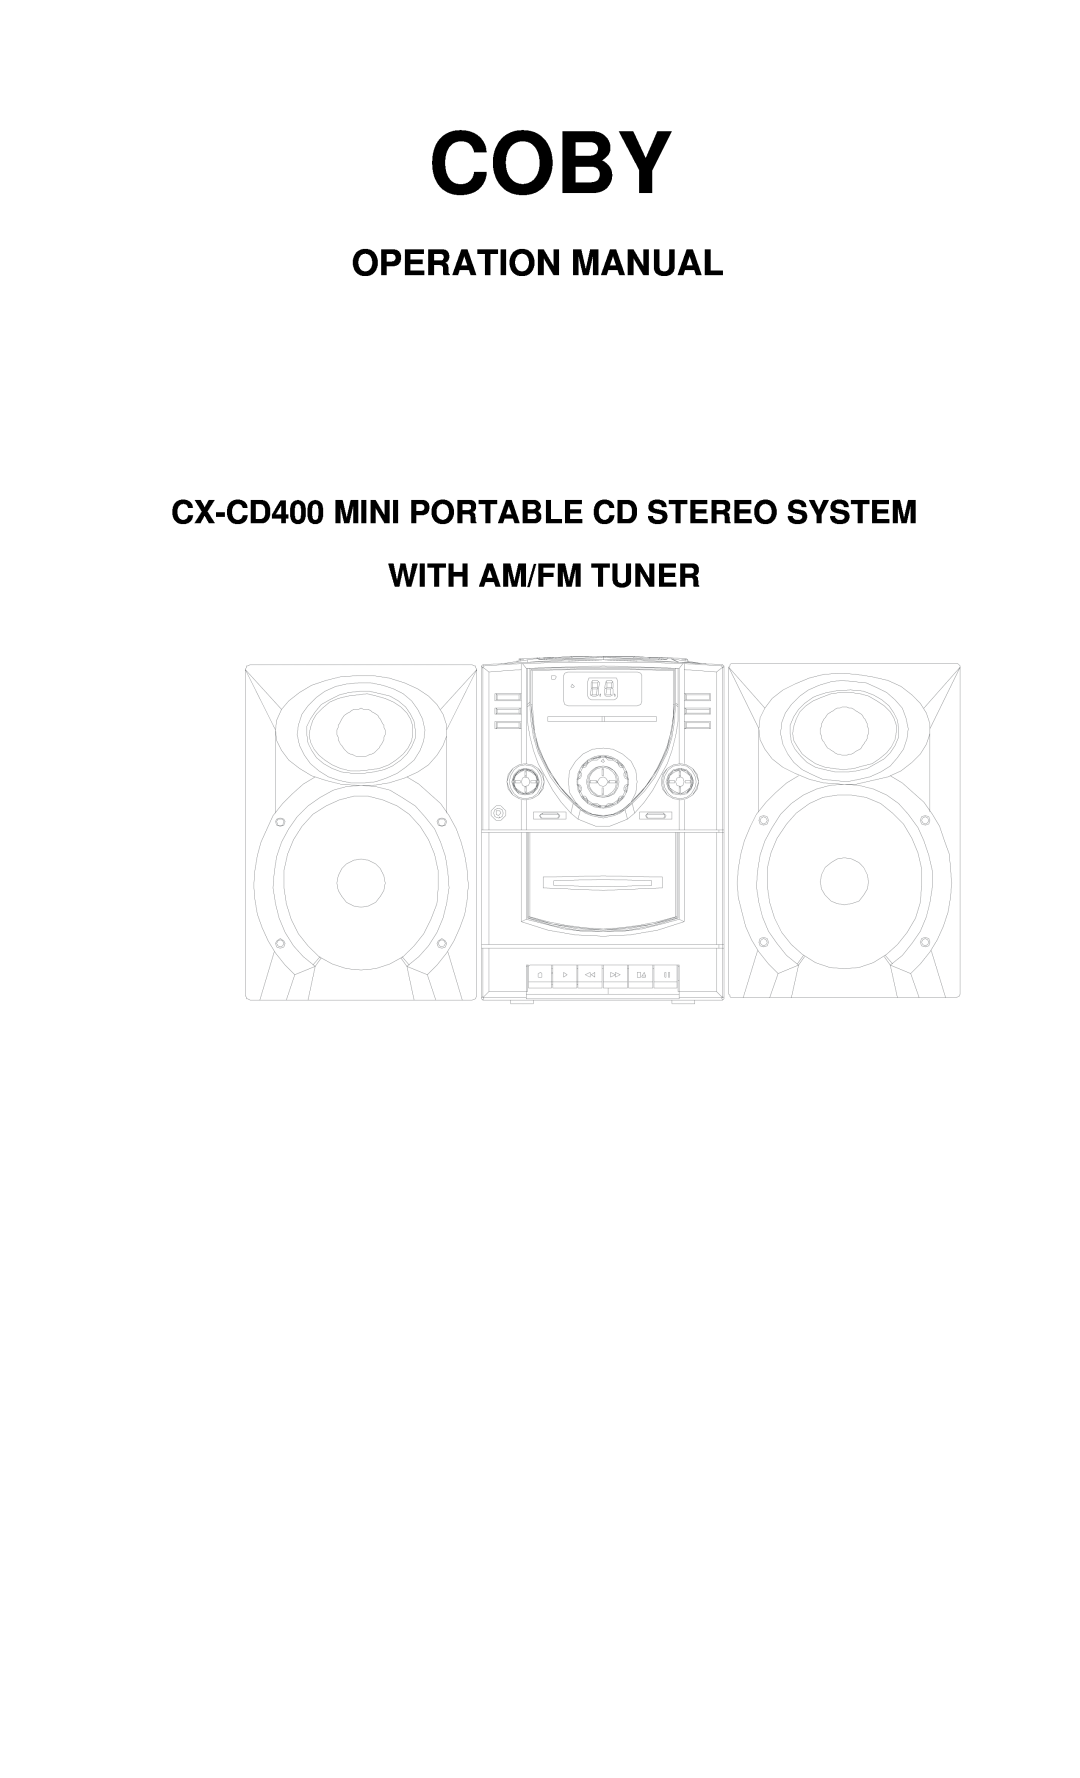 COBY electronic operation manual Coby, Operation Manual, CX-CD400MINI PORTABLE CD STEREO SYSTEM, With Am/Fm Tuner 